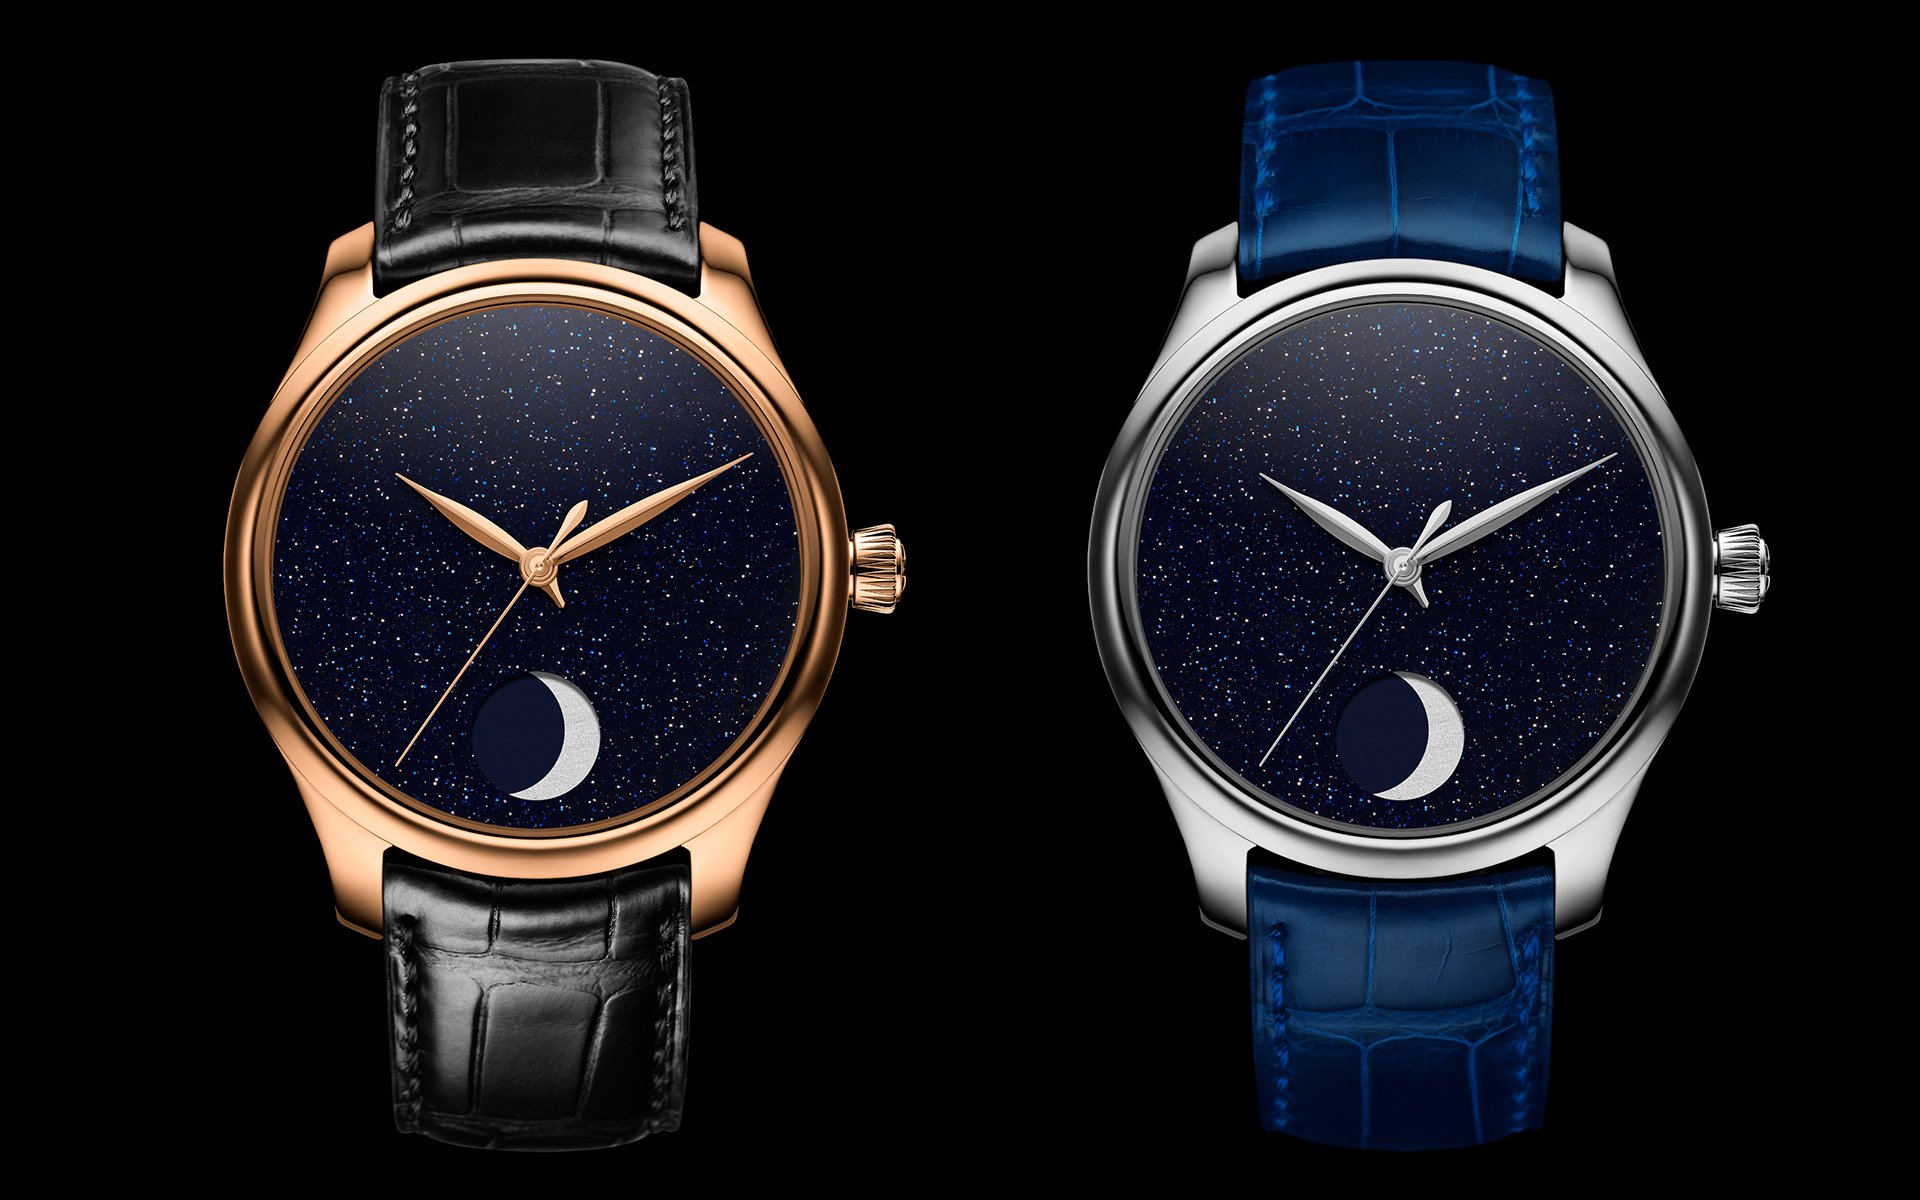 H. MOSER & CIE.: THE MOON AND STARS